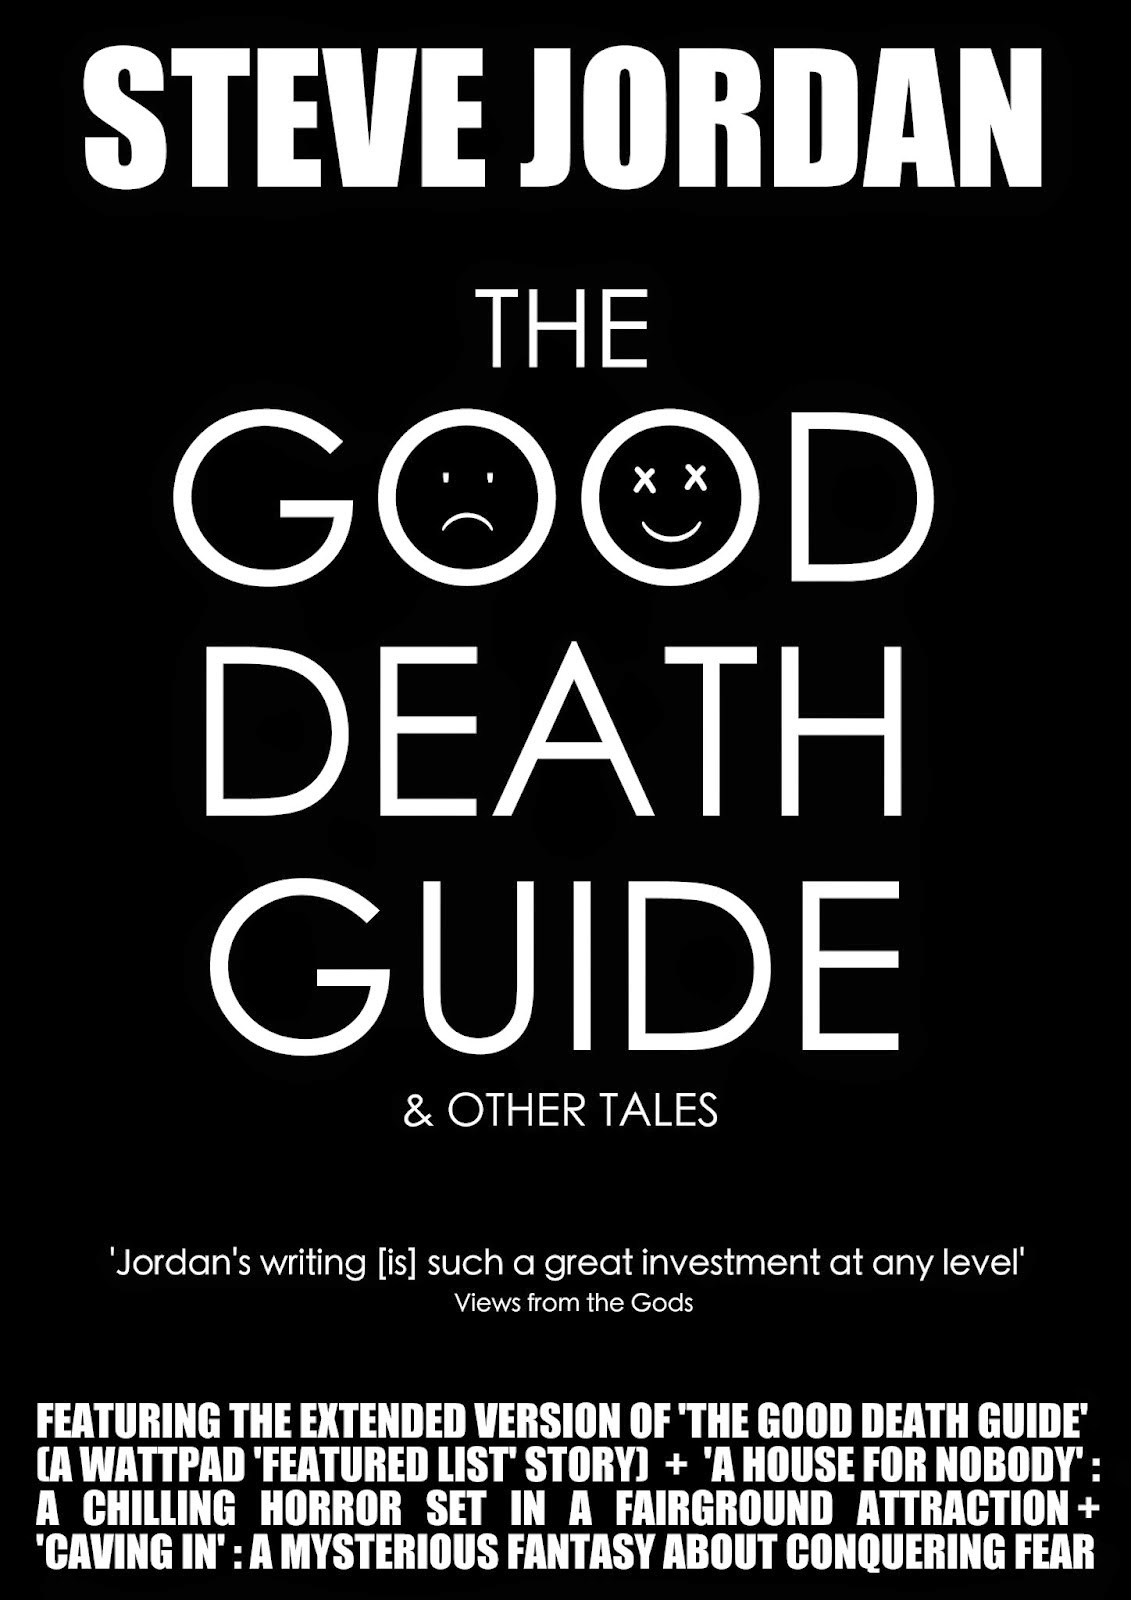 THE GOOD DEATH GUIDE & OTHER TALES